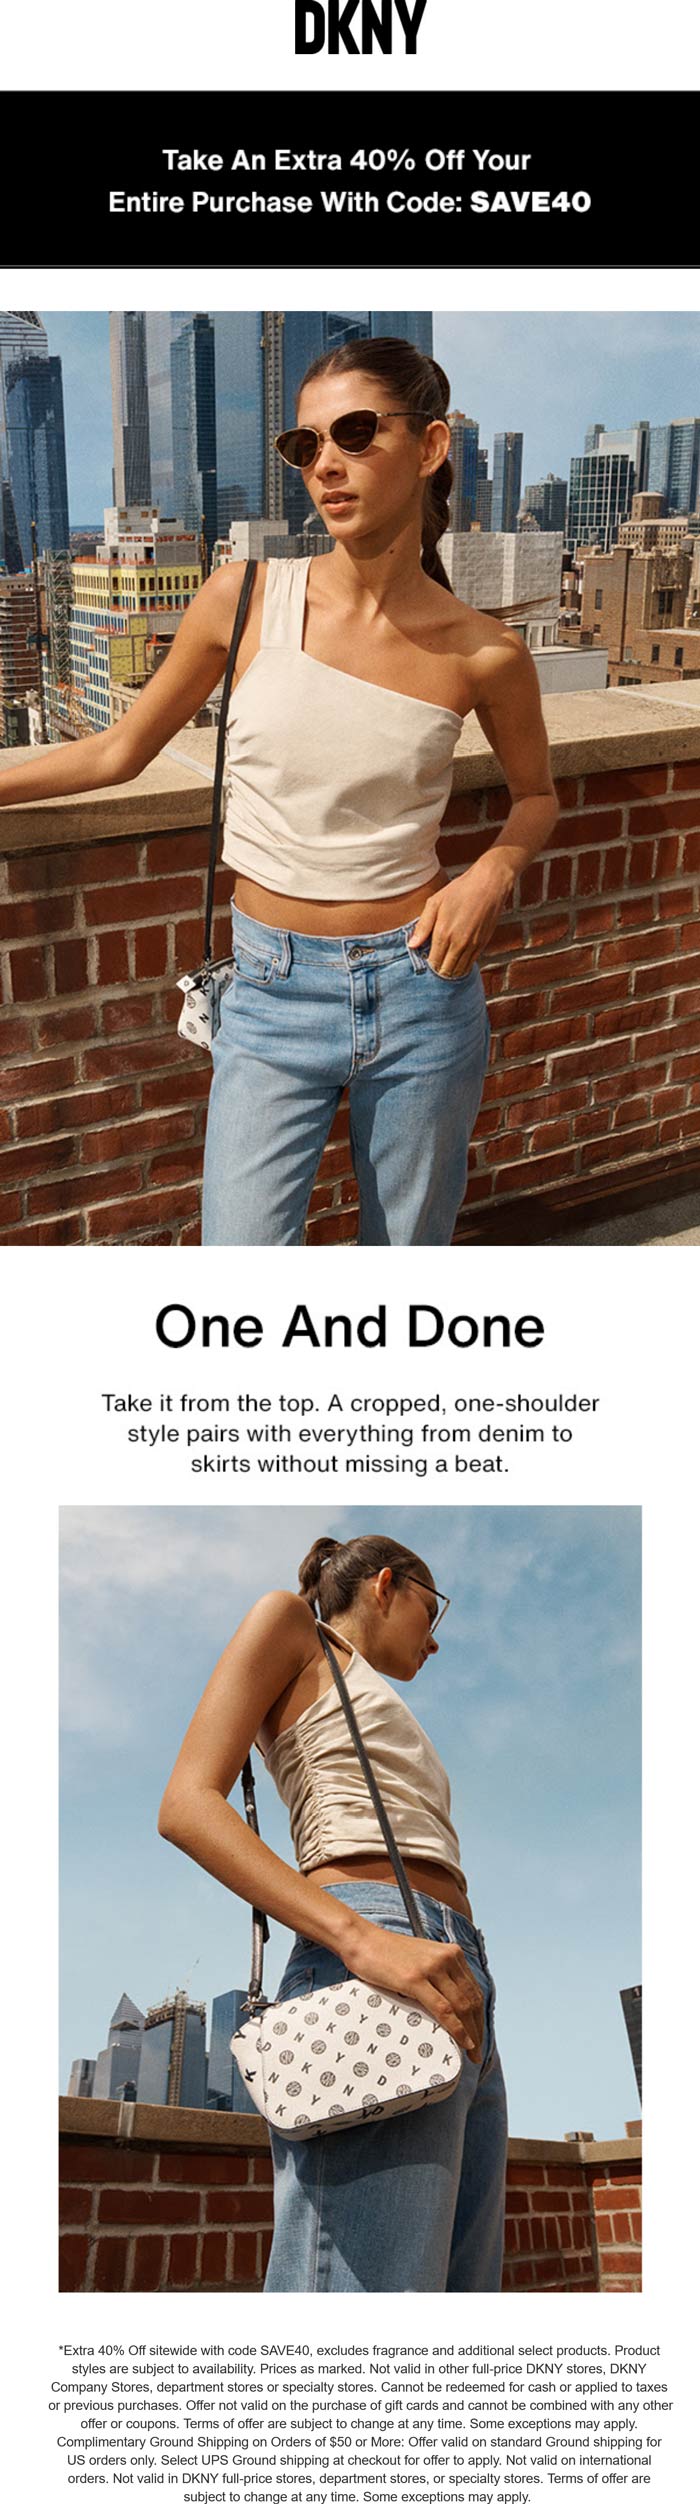 DKNY stores Coupon  40% off everything online at DKNY via promo code SAVE40 #dkny 